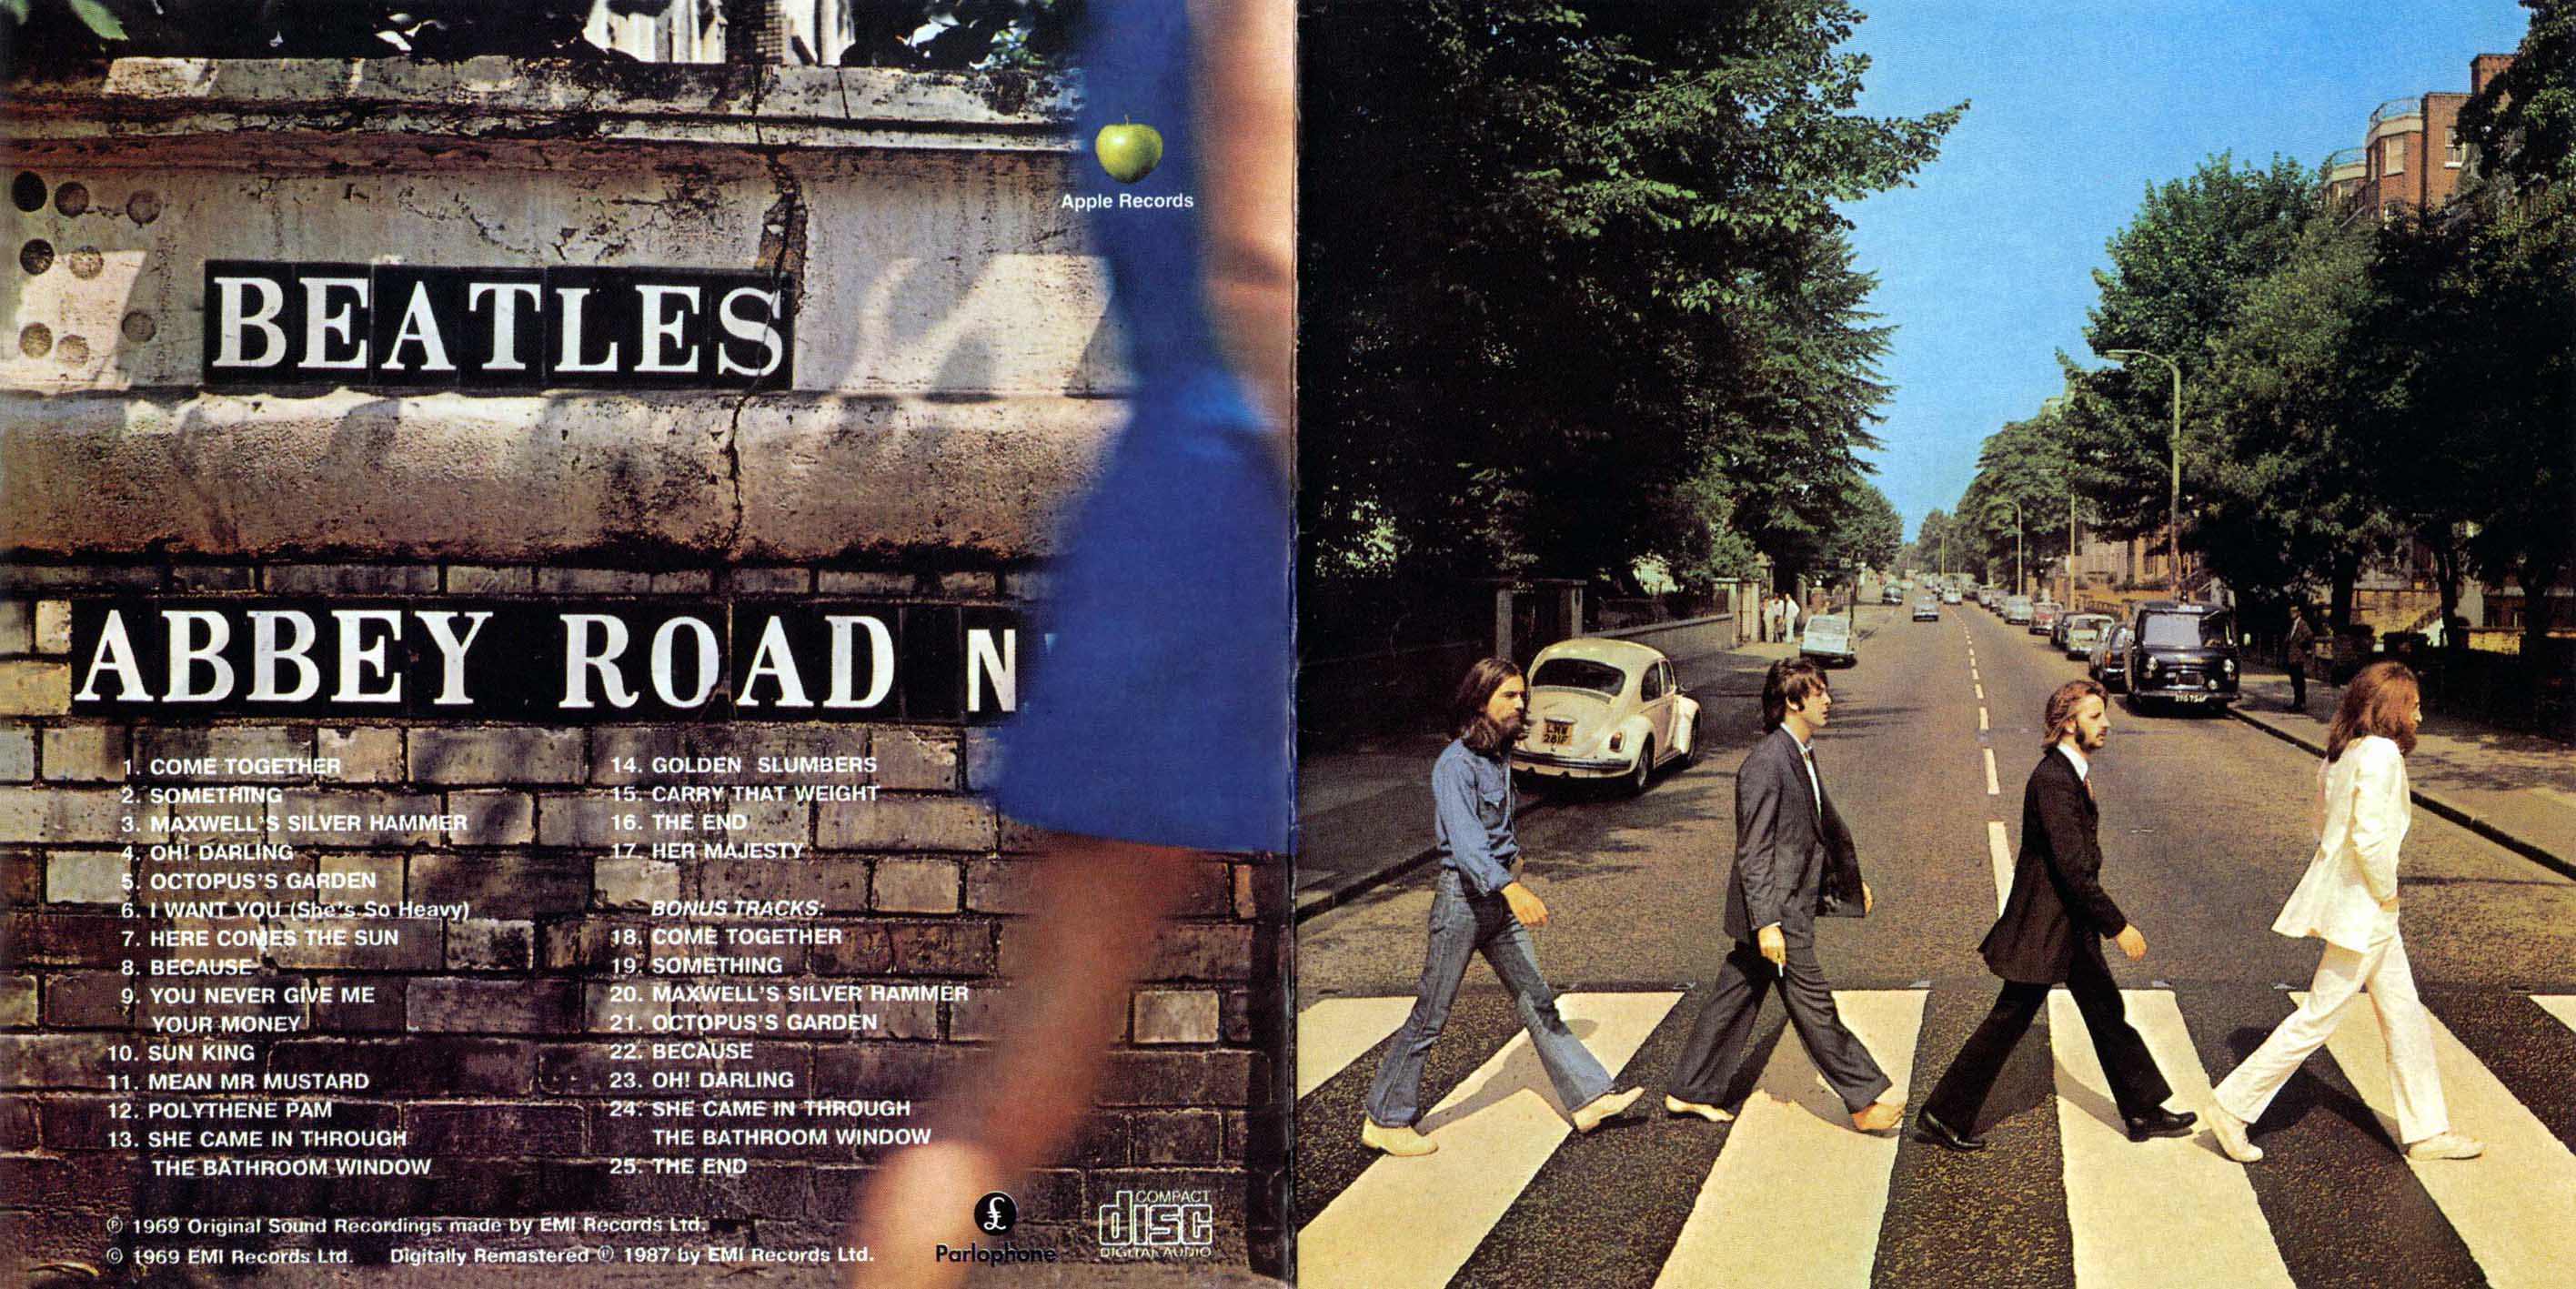 Abbey Road – Shooting the Messenger